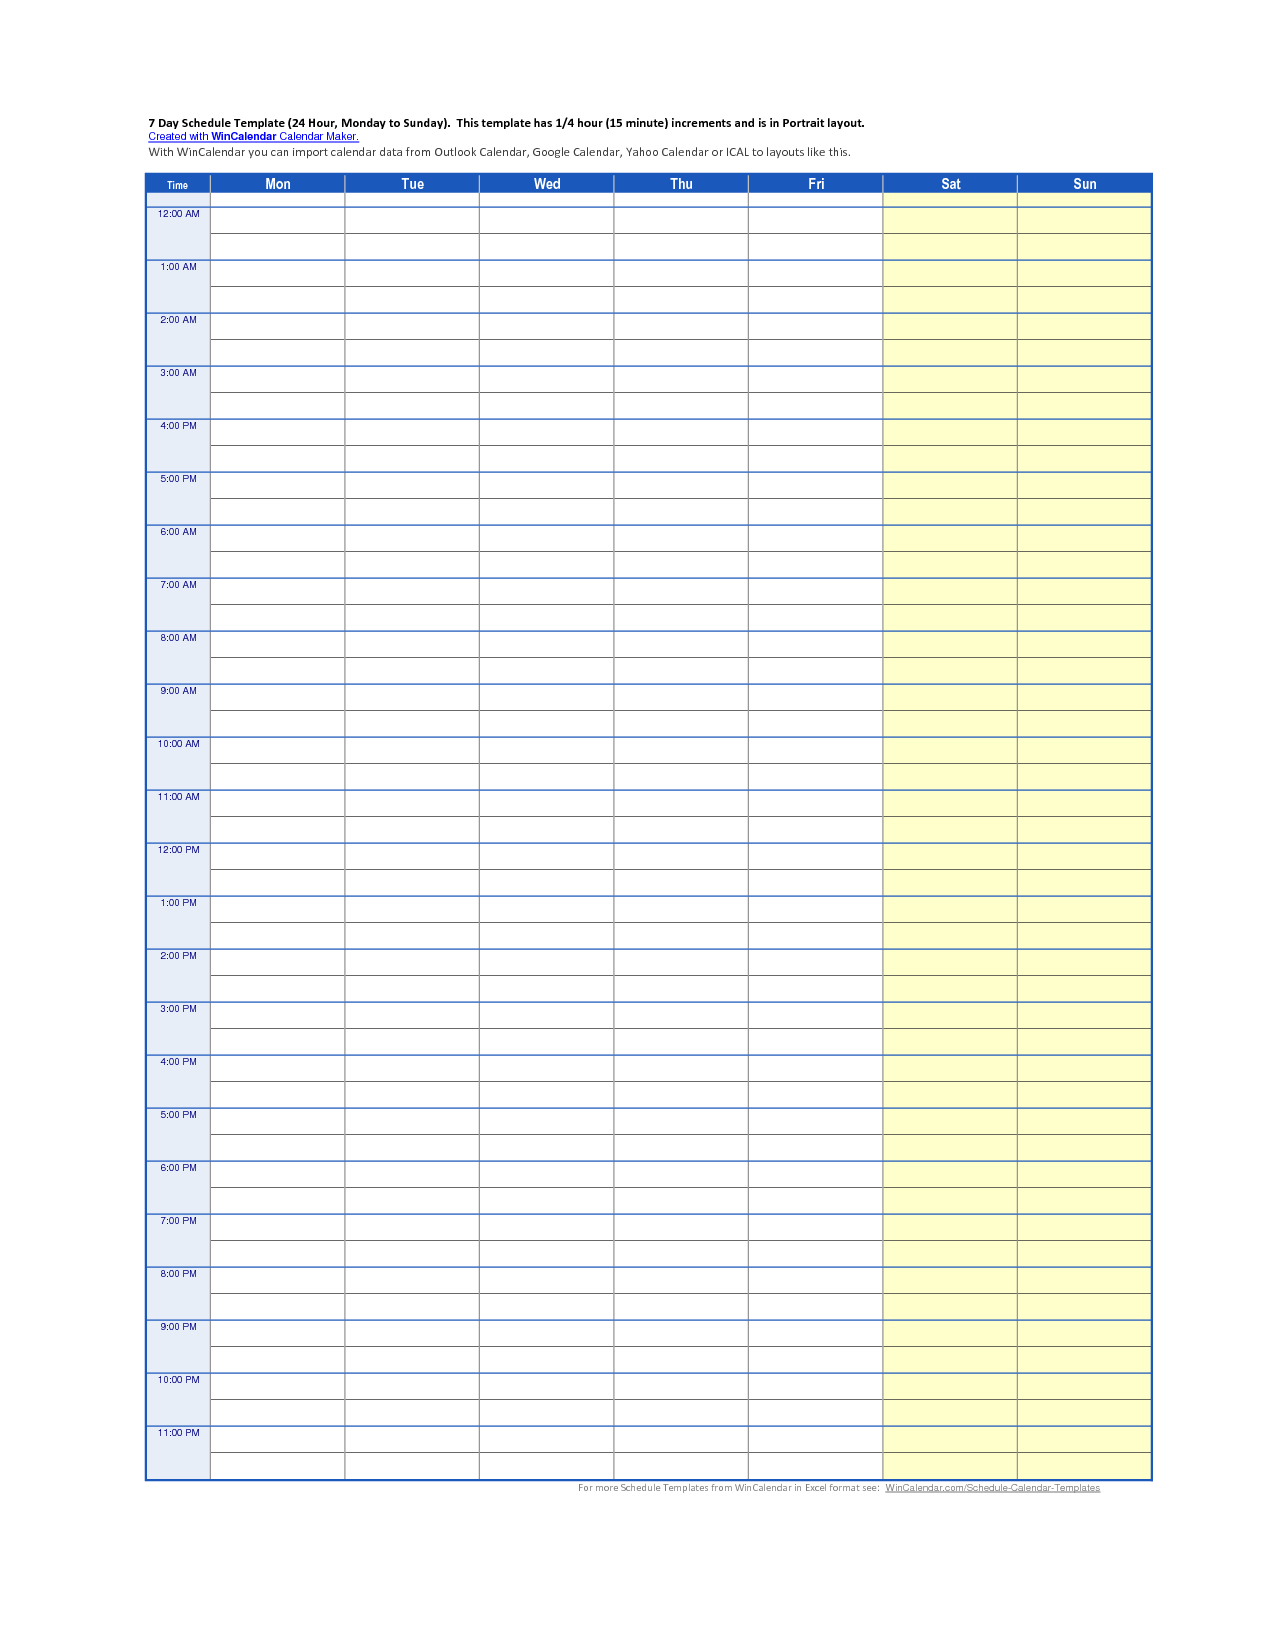 24 Hour Day Schedule Template | Schedule Template, Daily